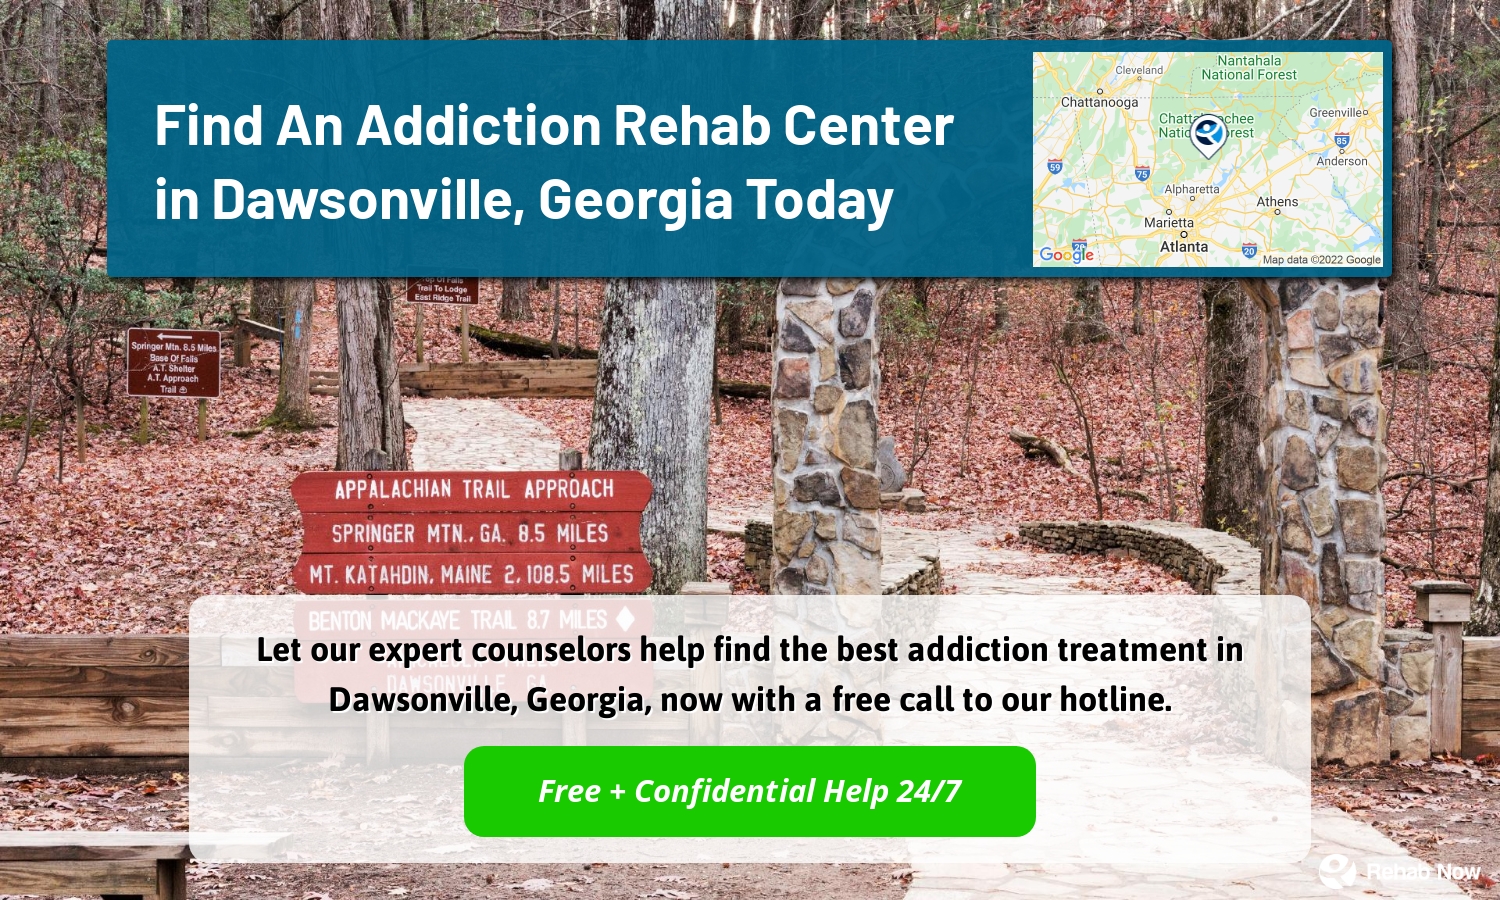 Let our expert counselors help find the best addiction treatment in Dawsonville, Georgia, now with a free call to our hotline.